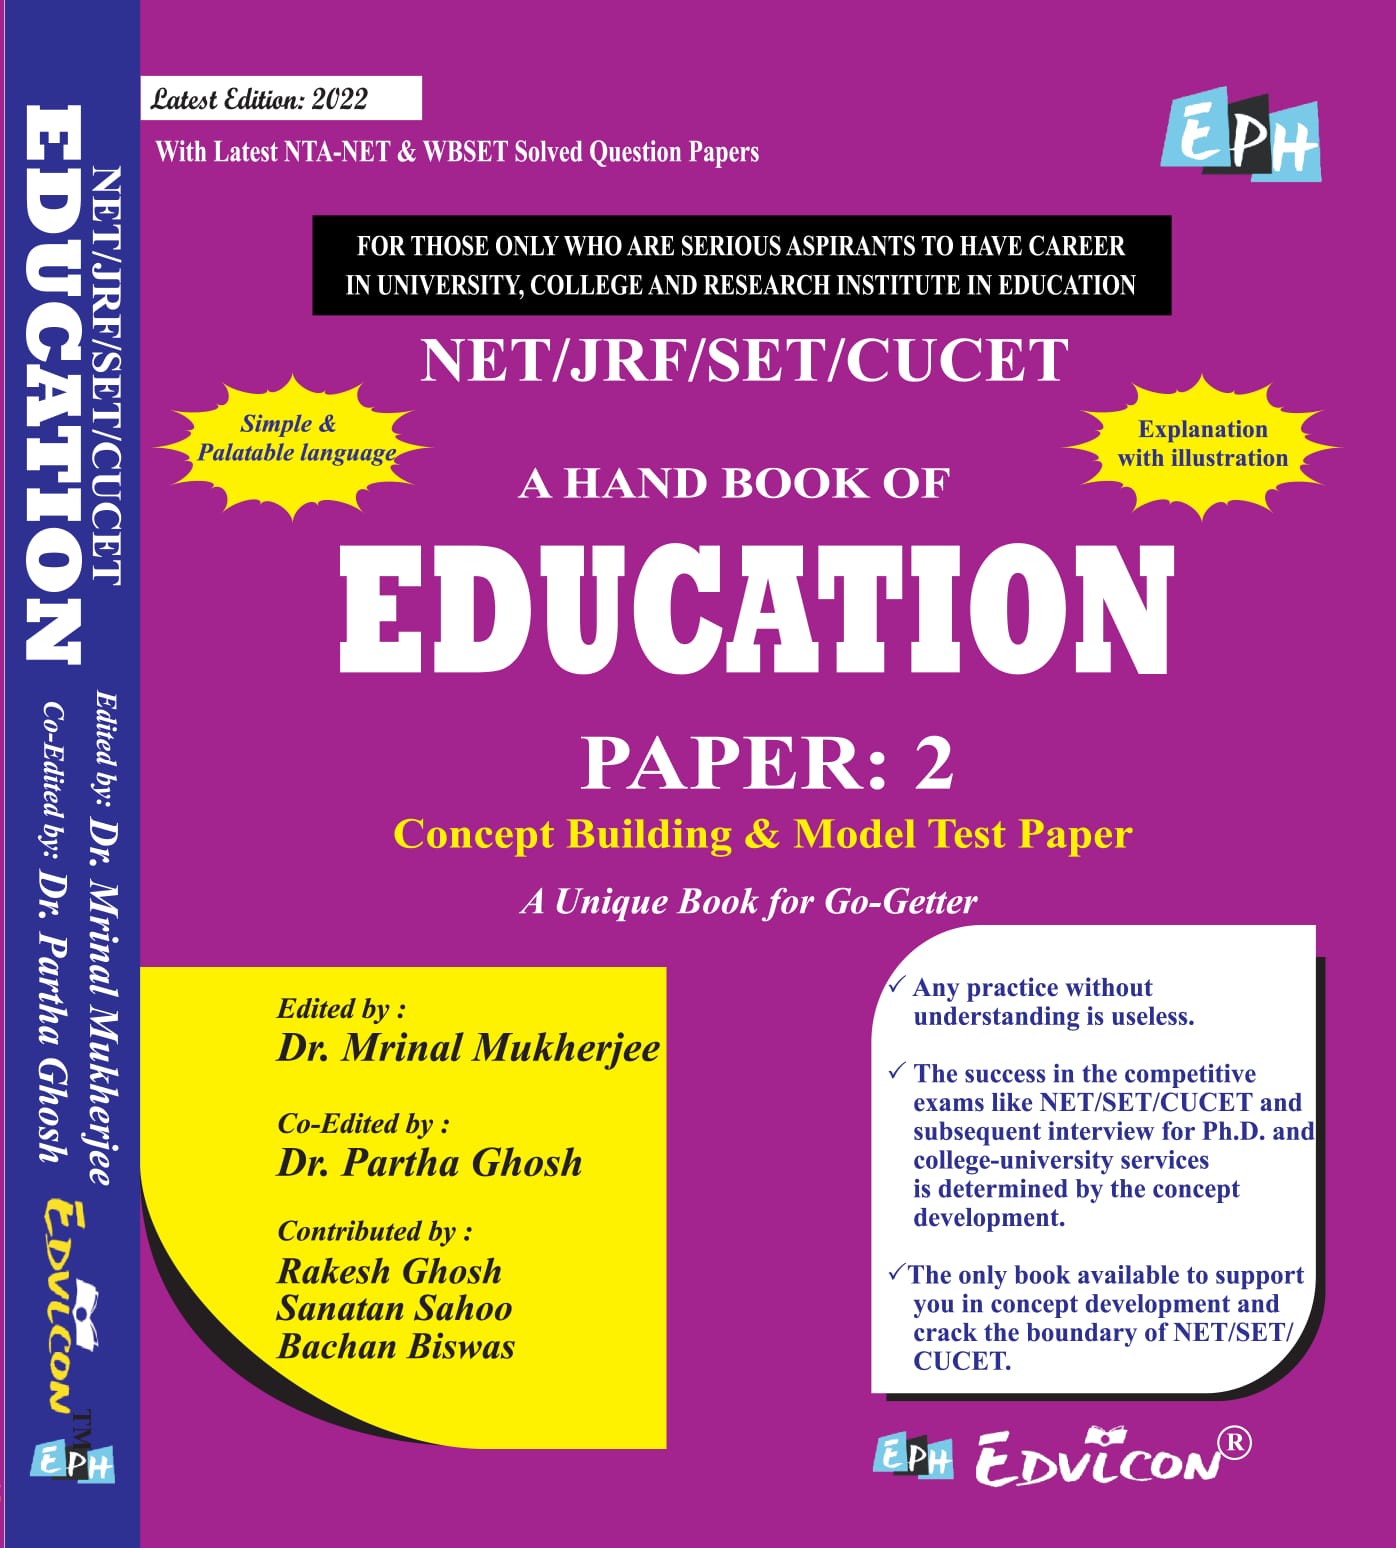 A HAND BOOK OF EDUCATION PAPER 2